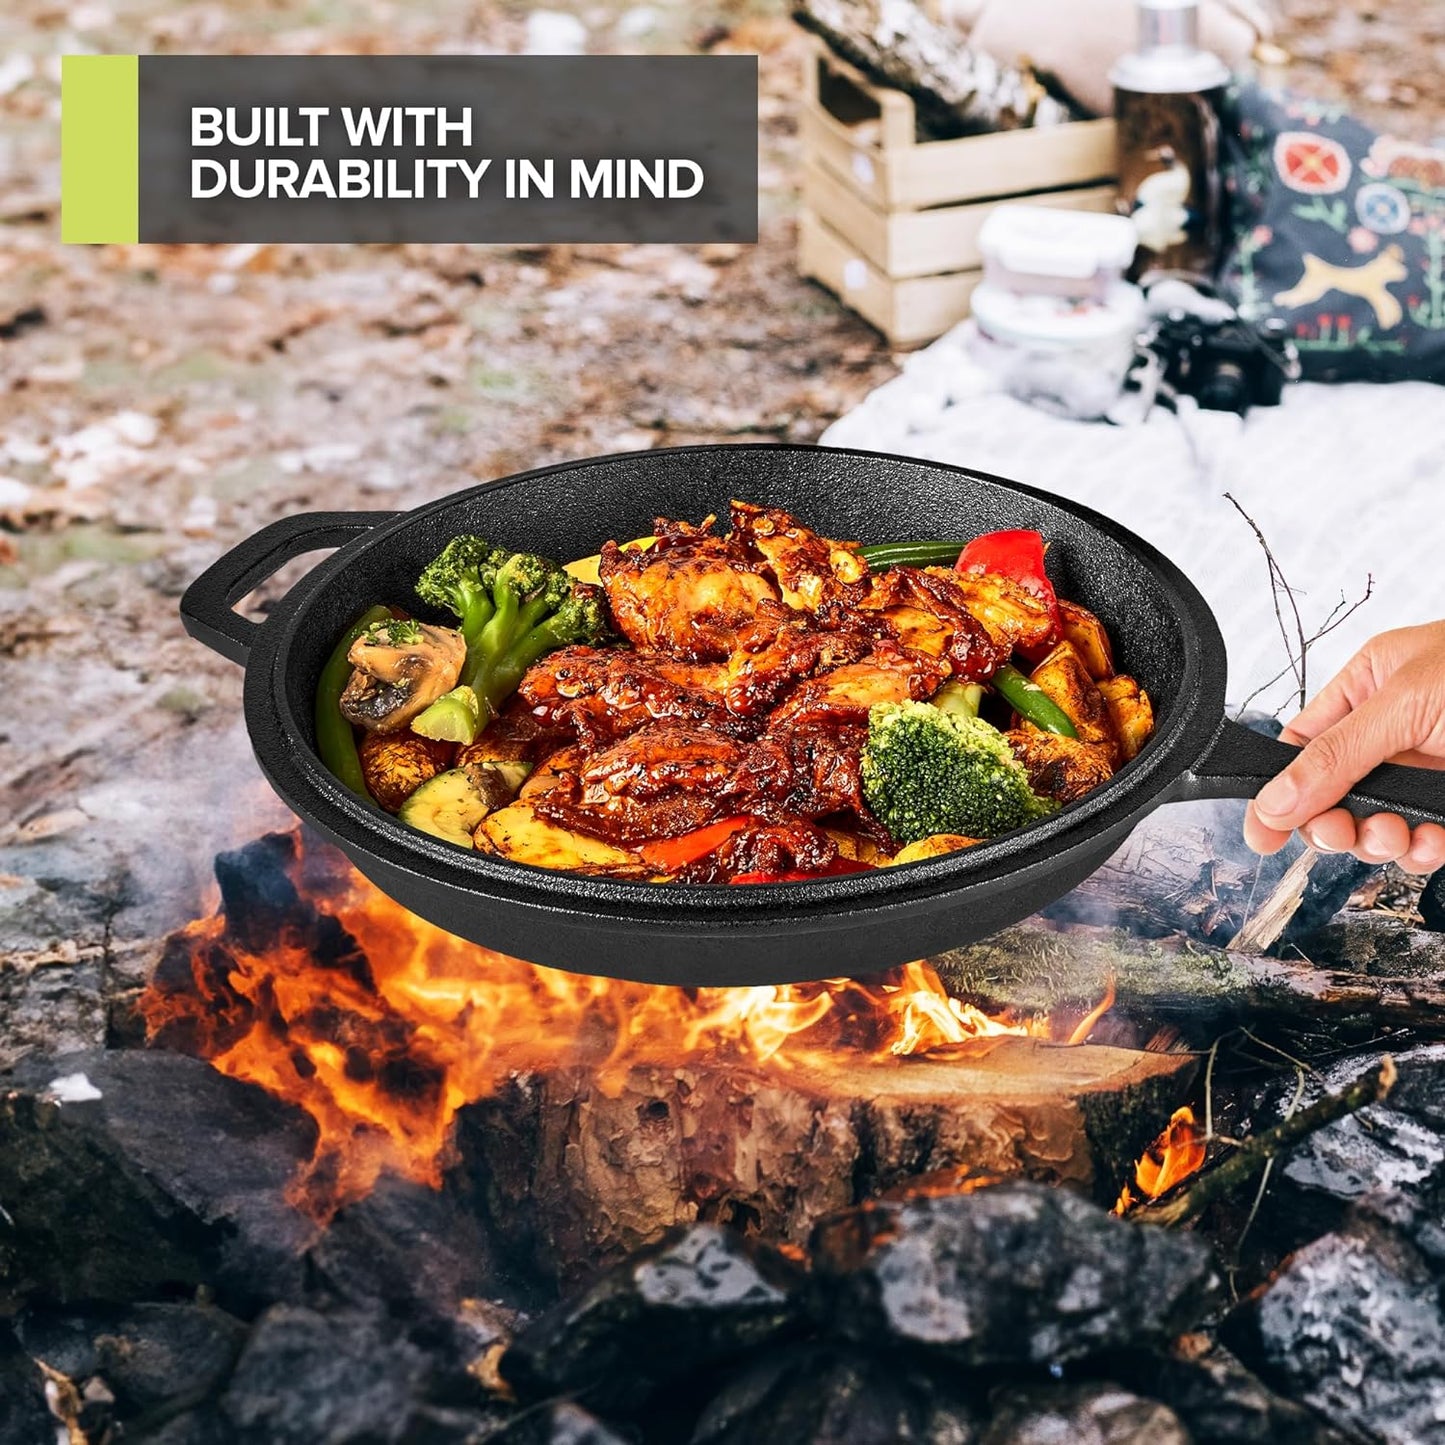 2-In-1 Dutch Oven, Cast Iron Pan (3.2QT) and Cast Iron Skillet (1.6QT) Combo, Cast Iron Pan with Lid, Preseasoned Cast Iron Pots and Pans Set, RV or Lodge Camping Cast Iron Set